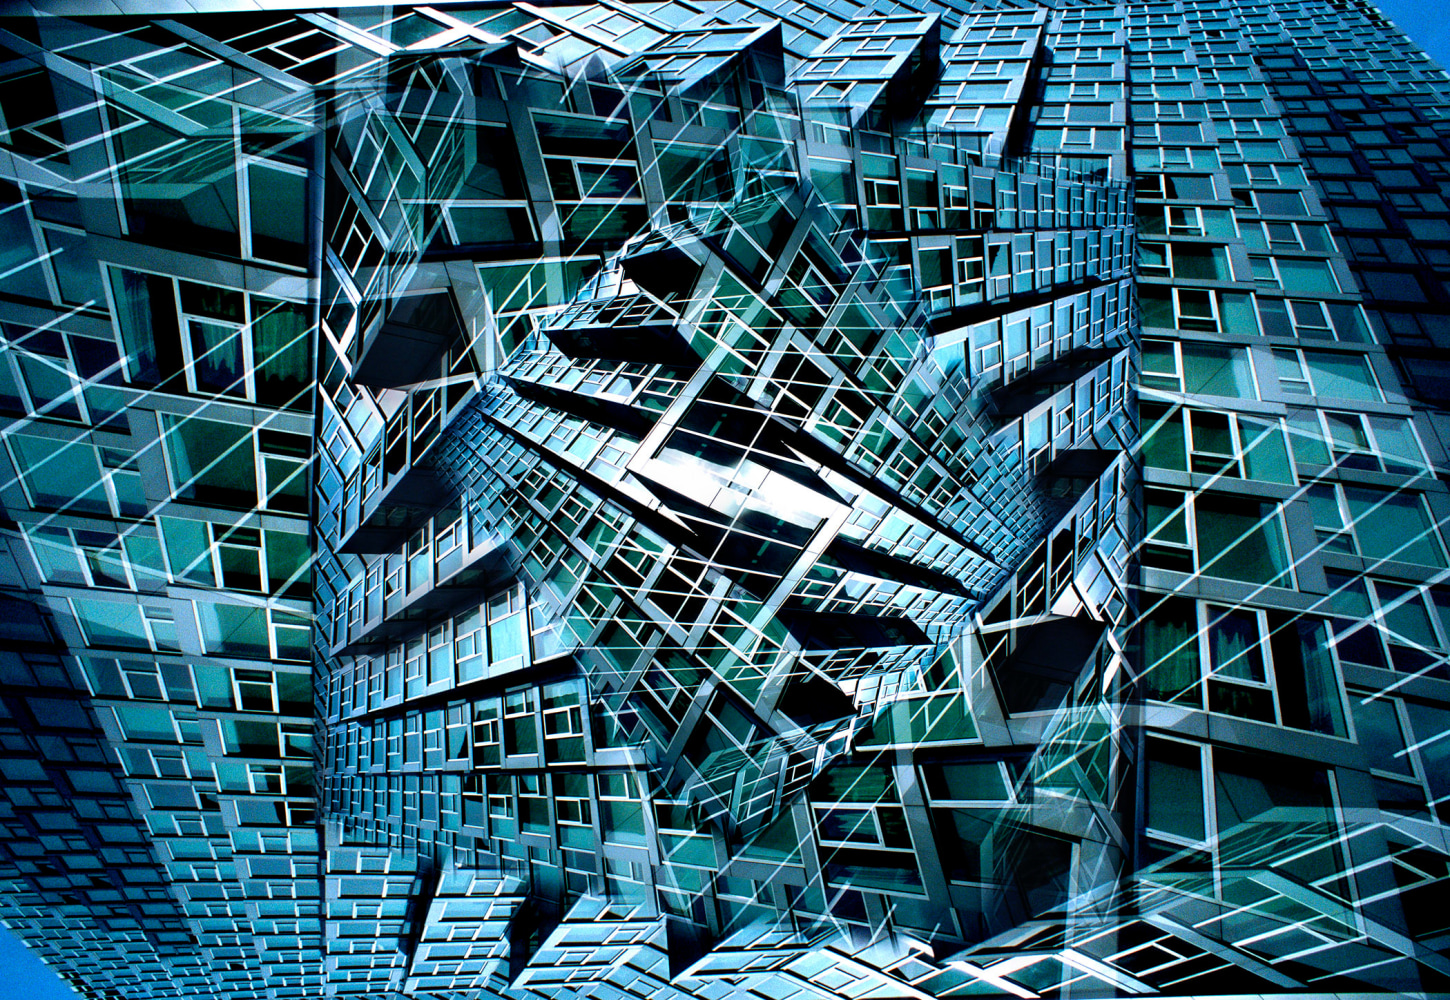 Chromaluxe brilliant print of a kaleidoscopic abstract image featuring a building